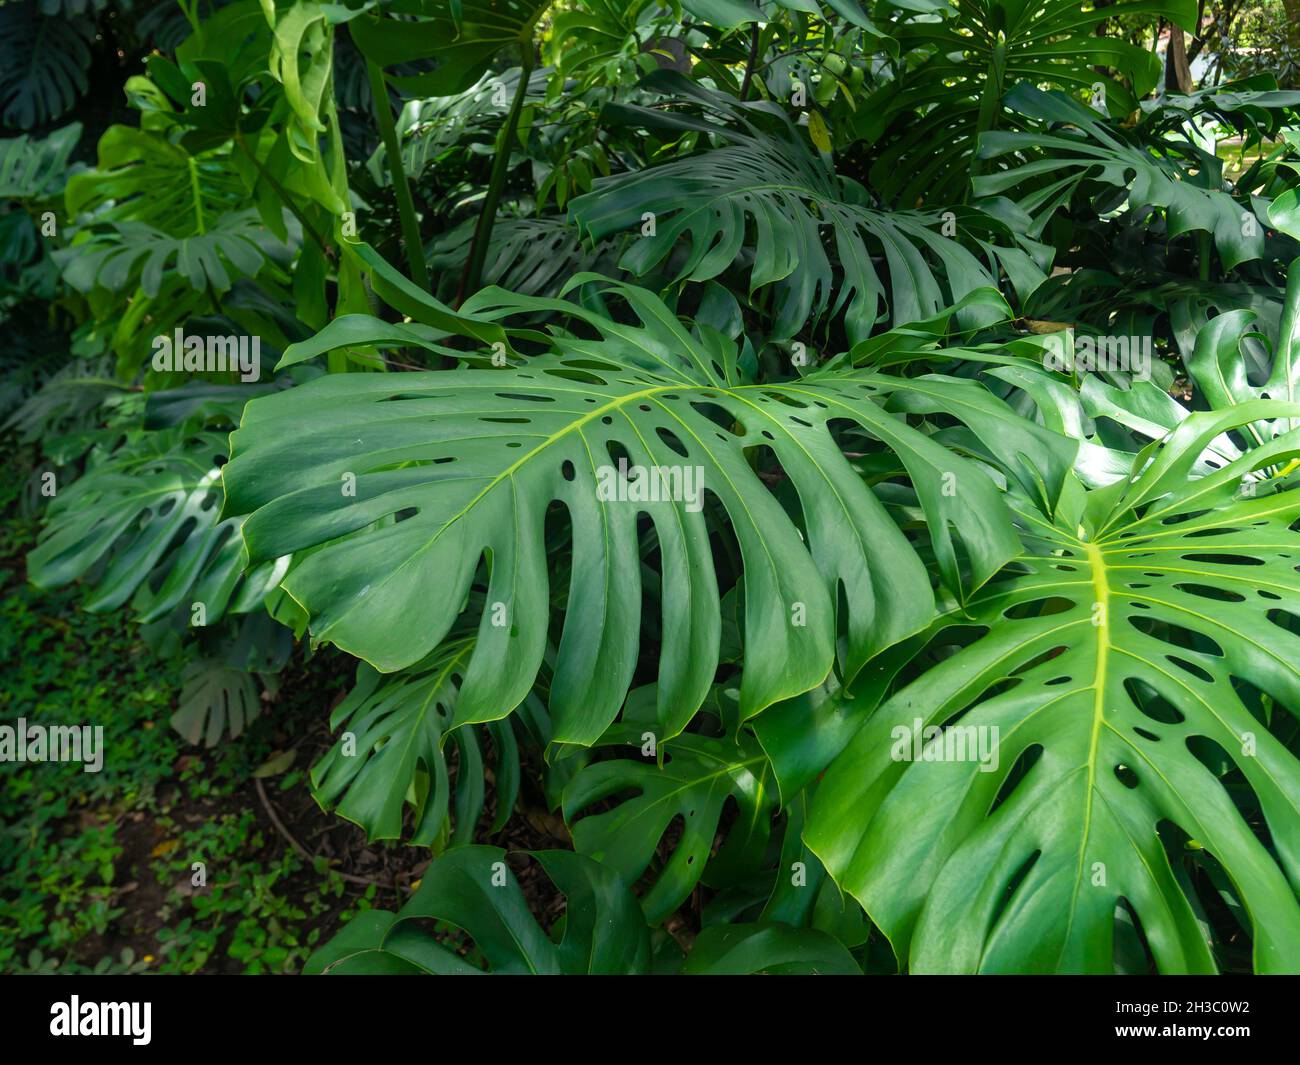 Swiss Cheese Plant (Monstera deliciosa) in the Garden is a Plant with many Holes in the Leaves Stock Photo